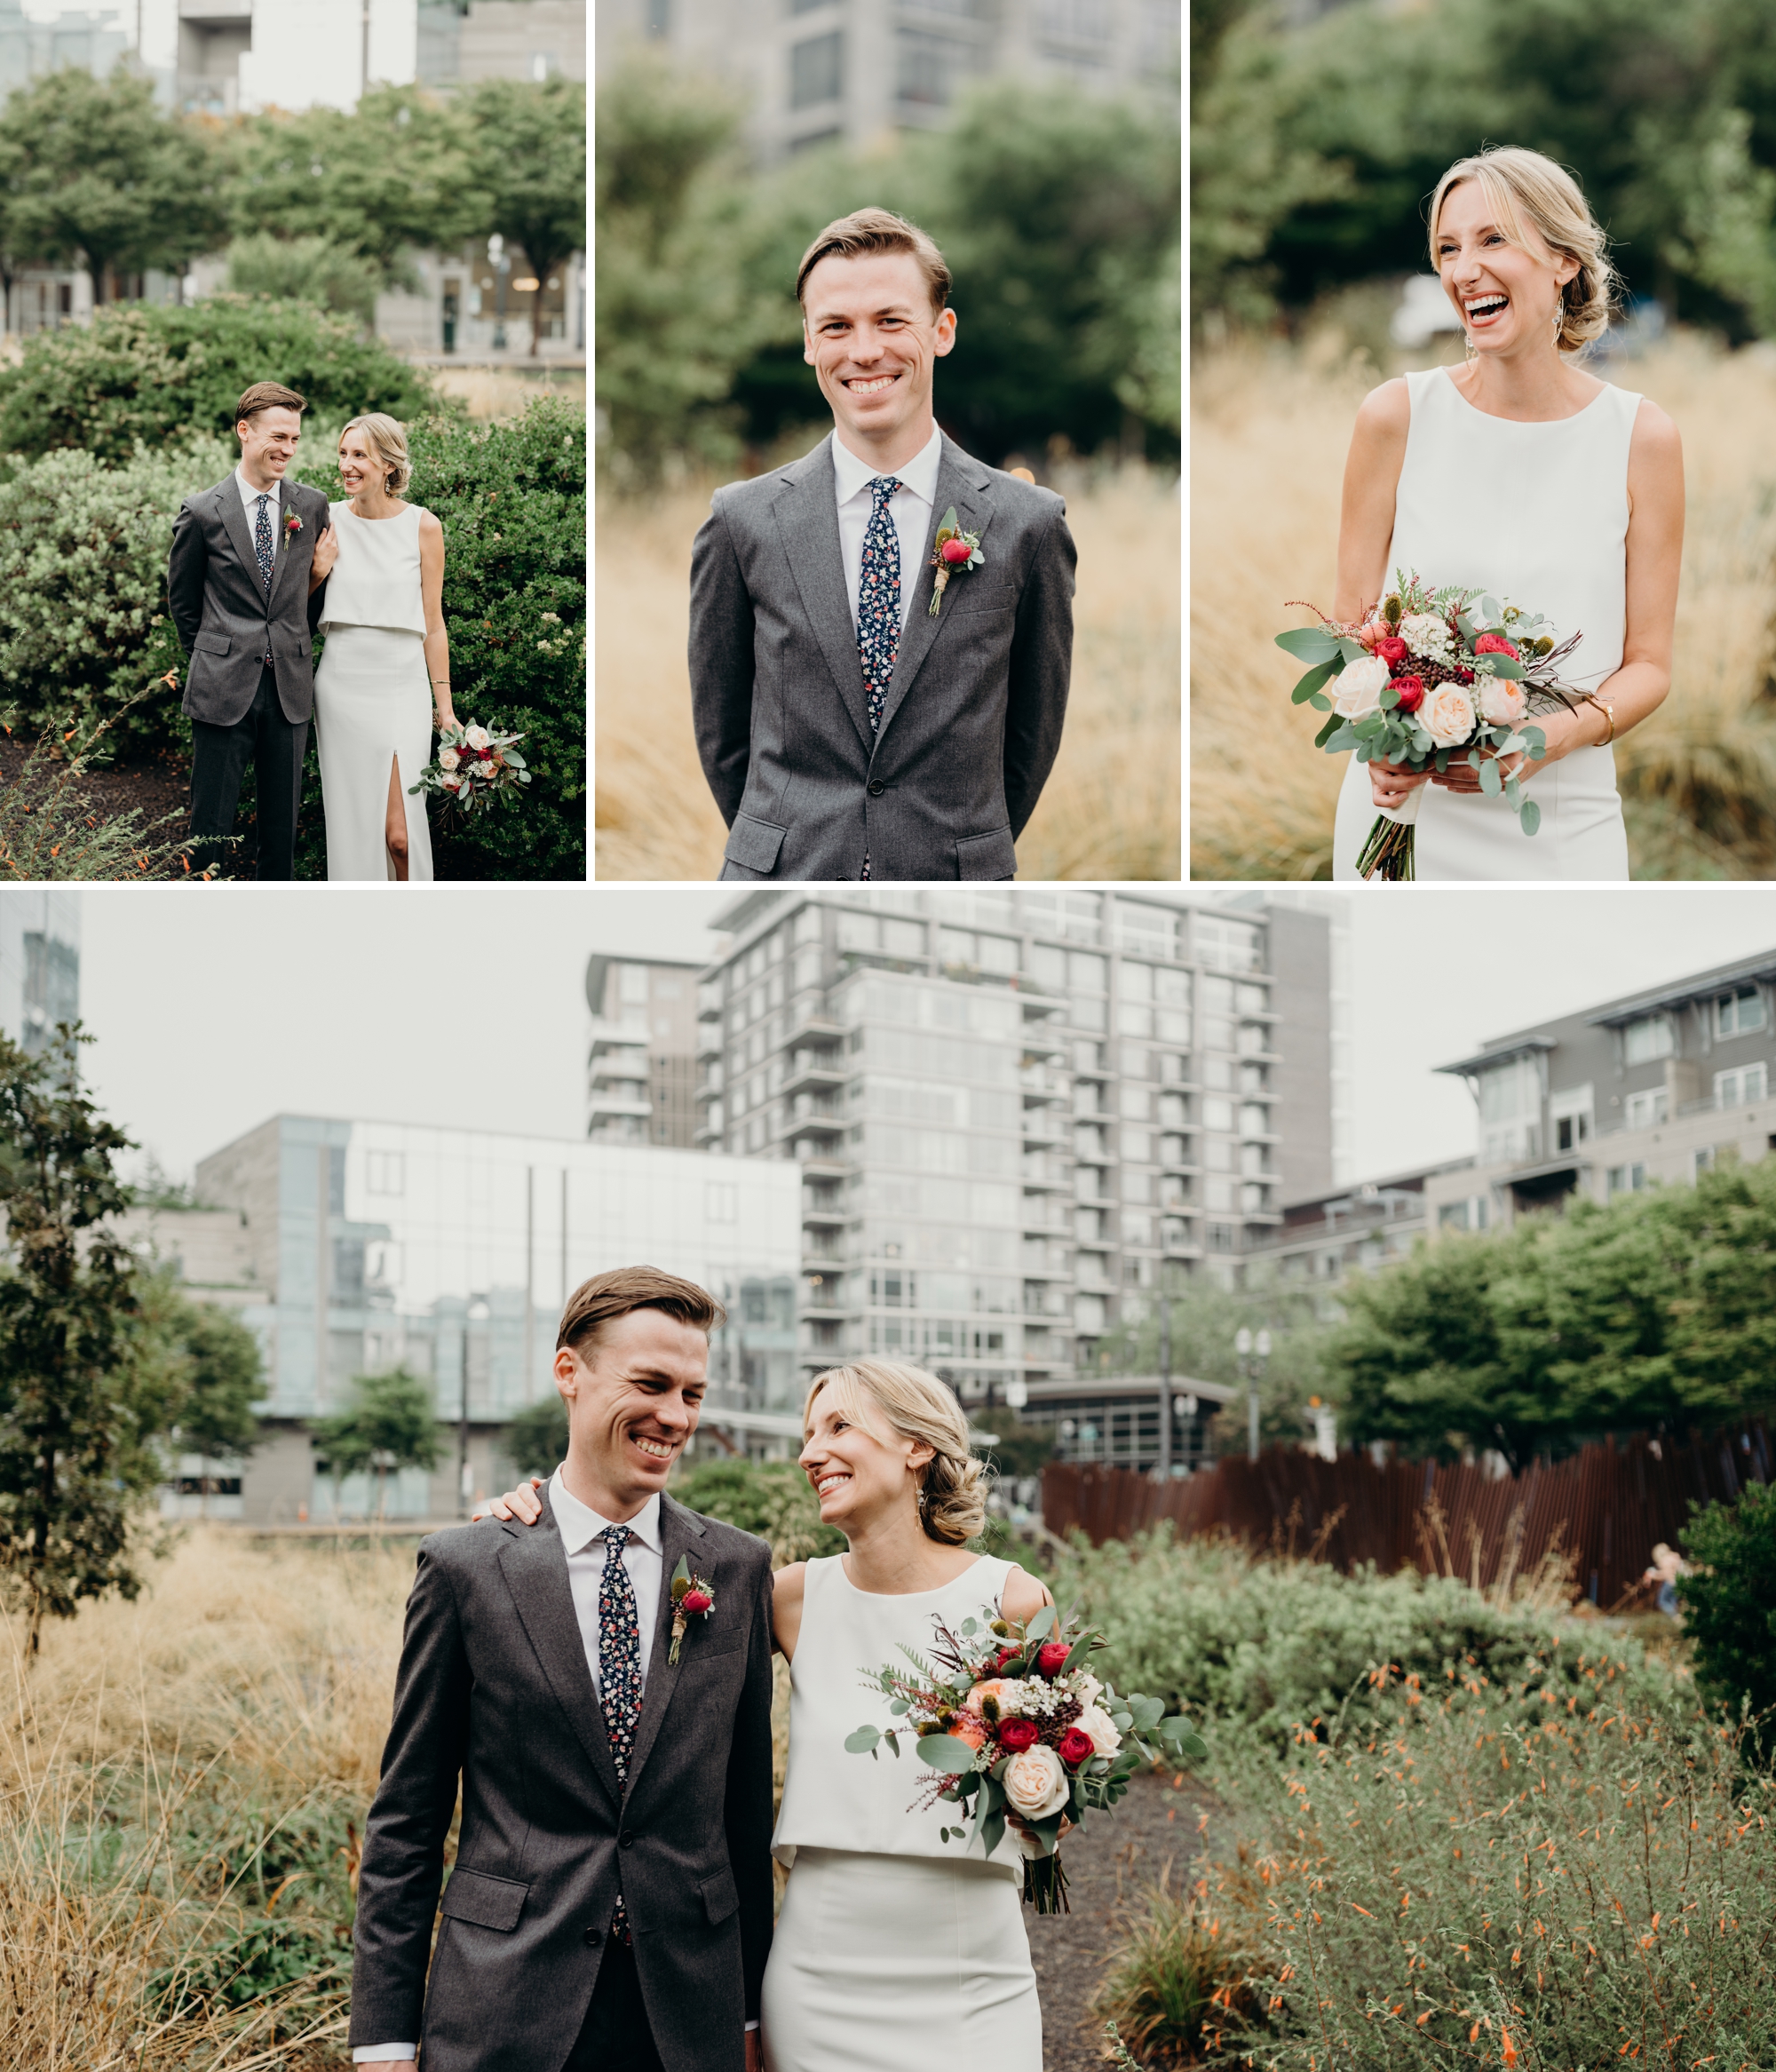 Bride and groom portraits in downtown Portland, Oregon by Briana Morrison Photography